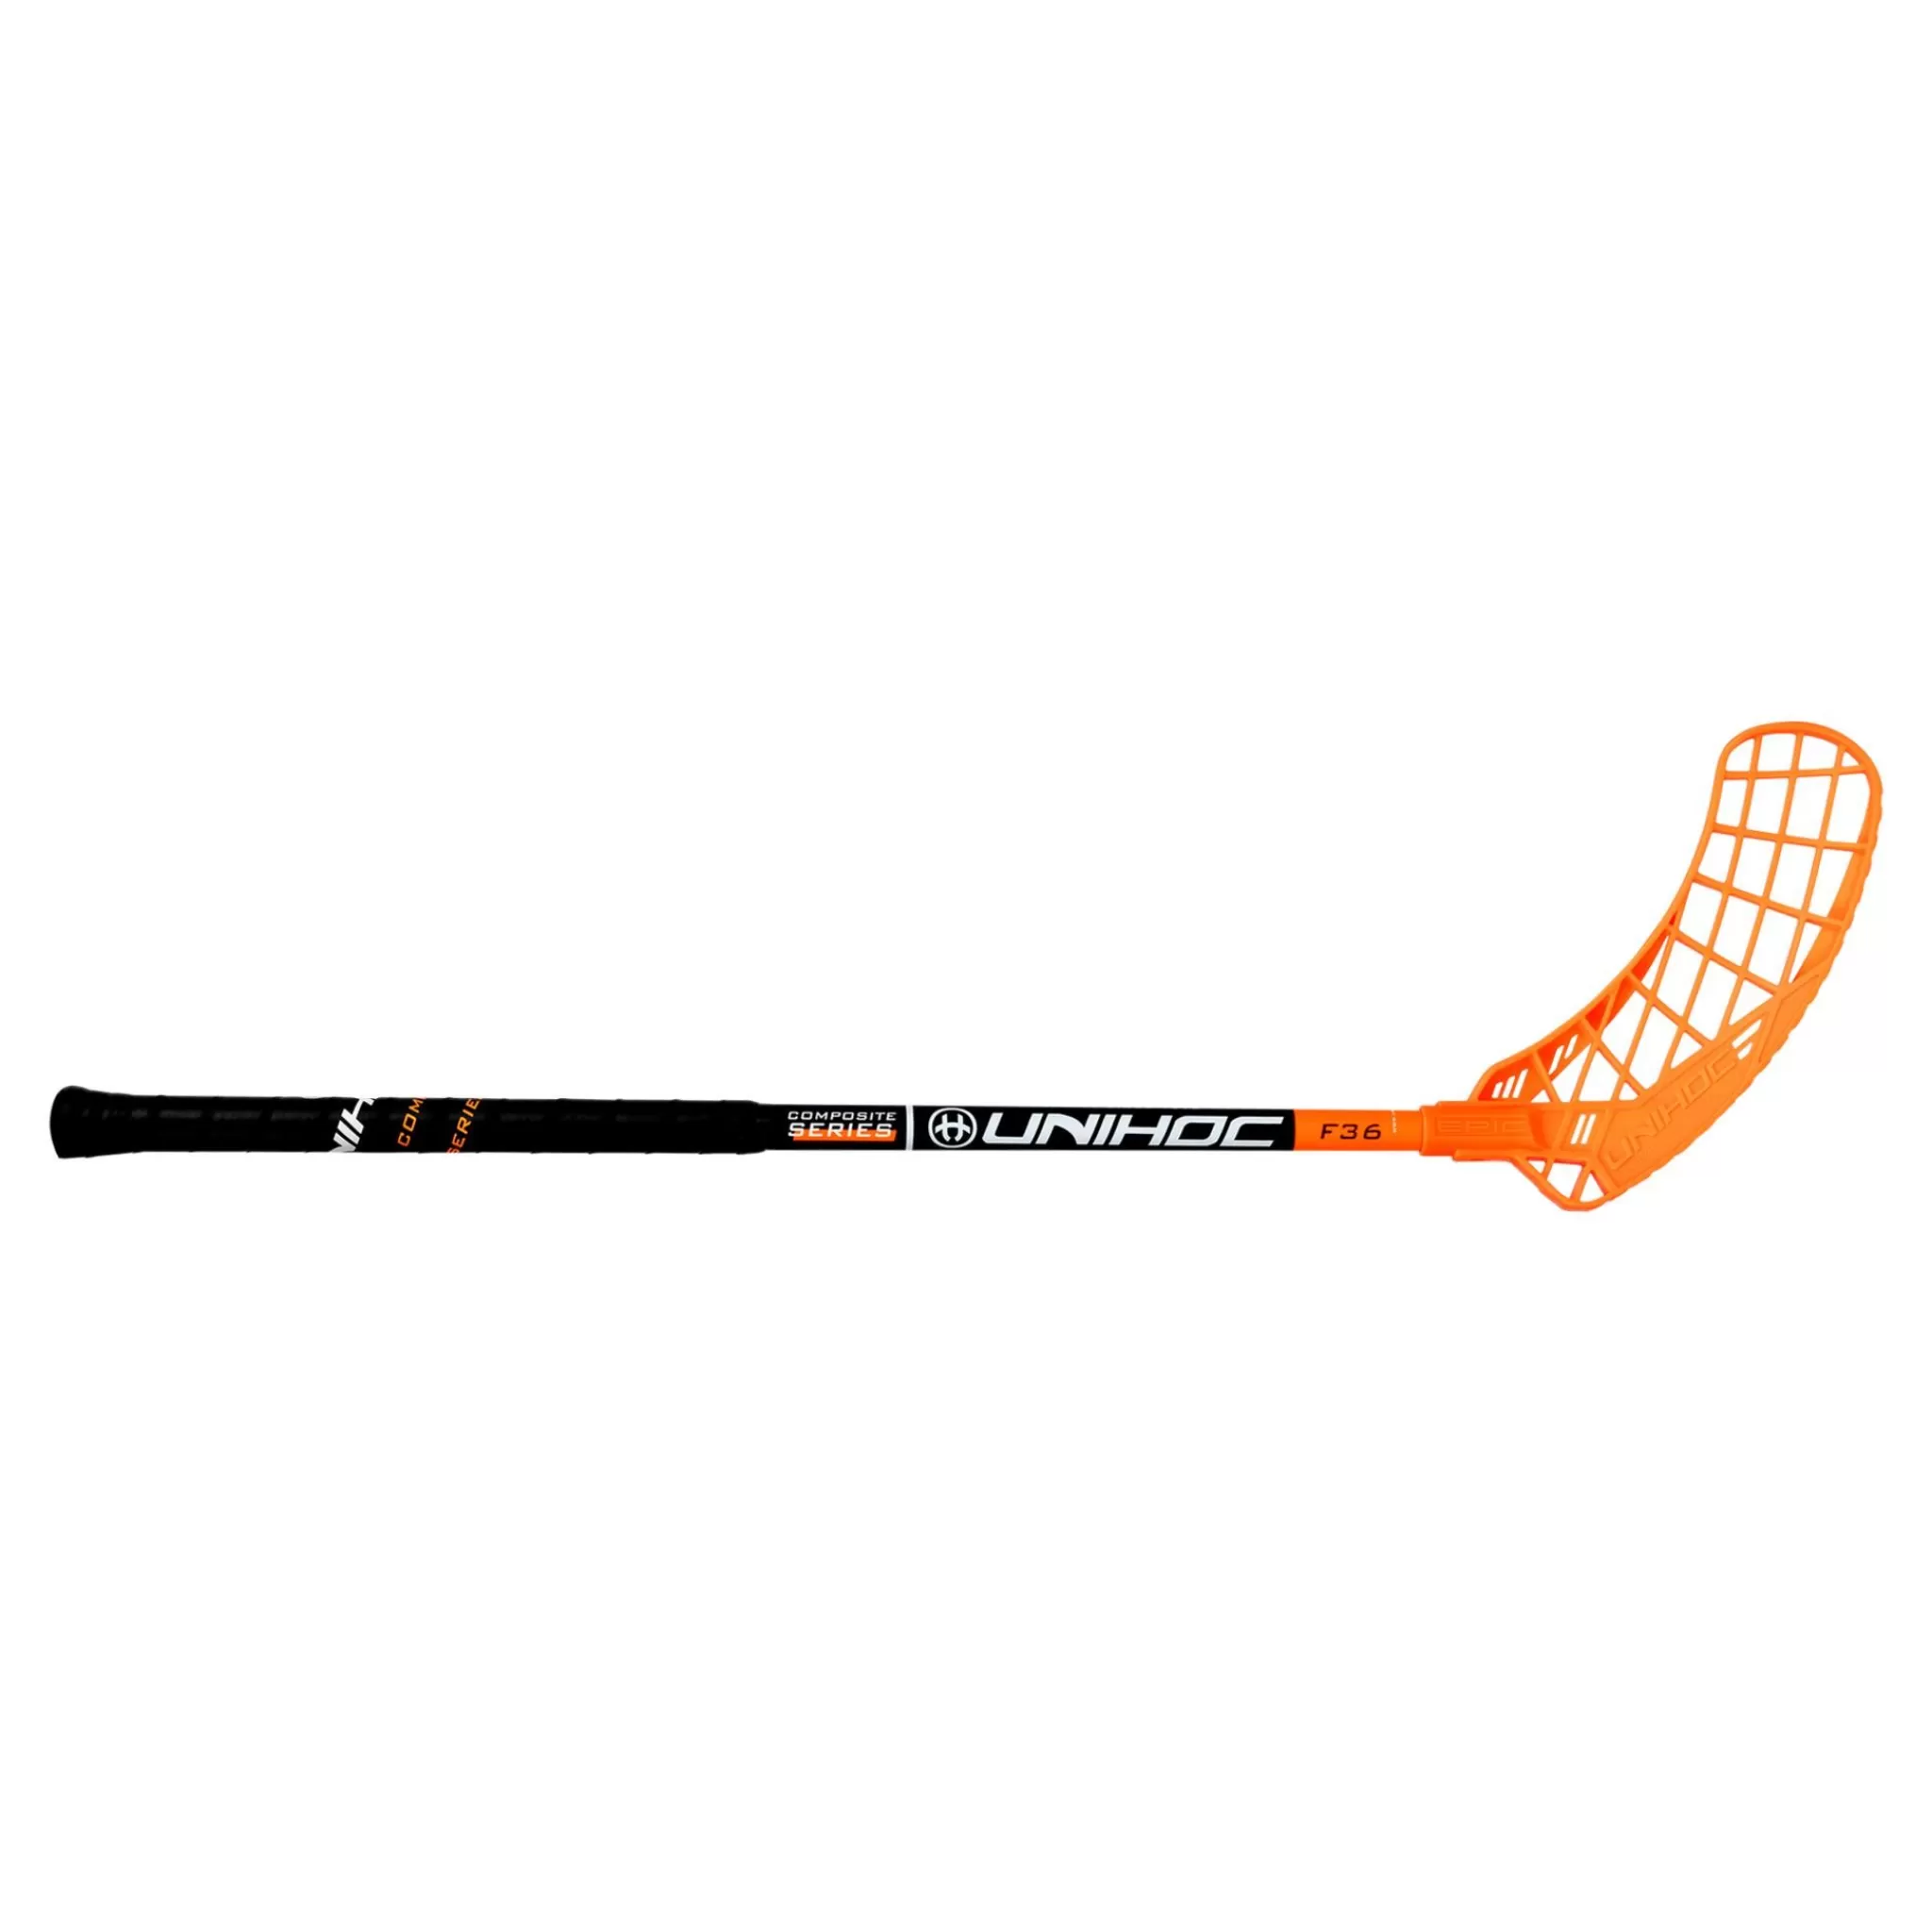 Cheap unihoc Epic Youngster Composite 36 -Yth 22/23, Innebandykolle Barn